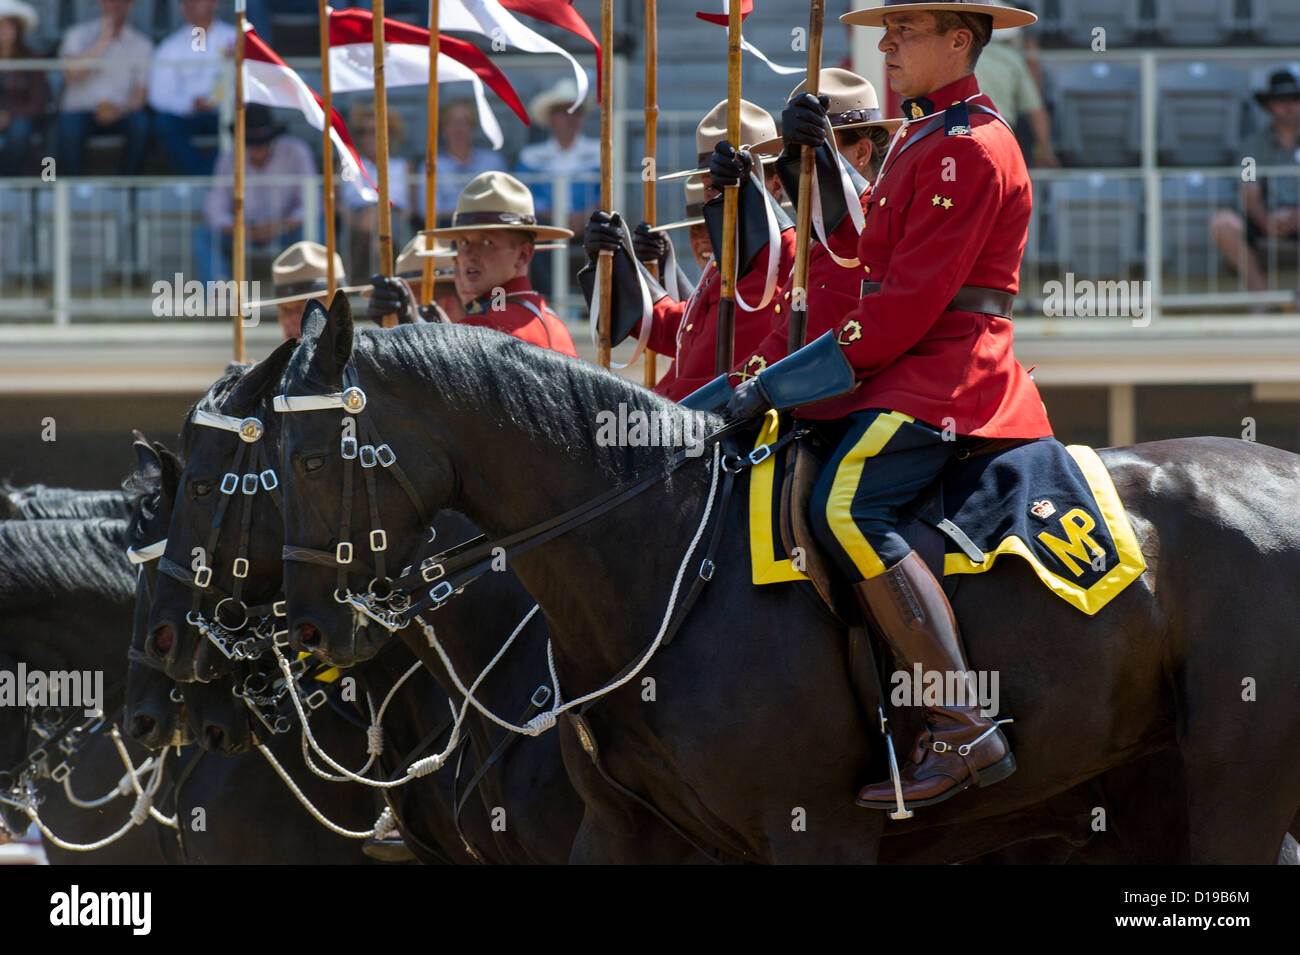 RCMP Musical Ride at the Calgary Stampede Rodeo opening ceremonies Stock Photo